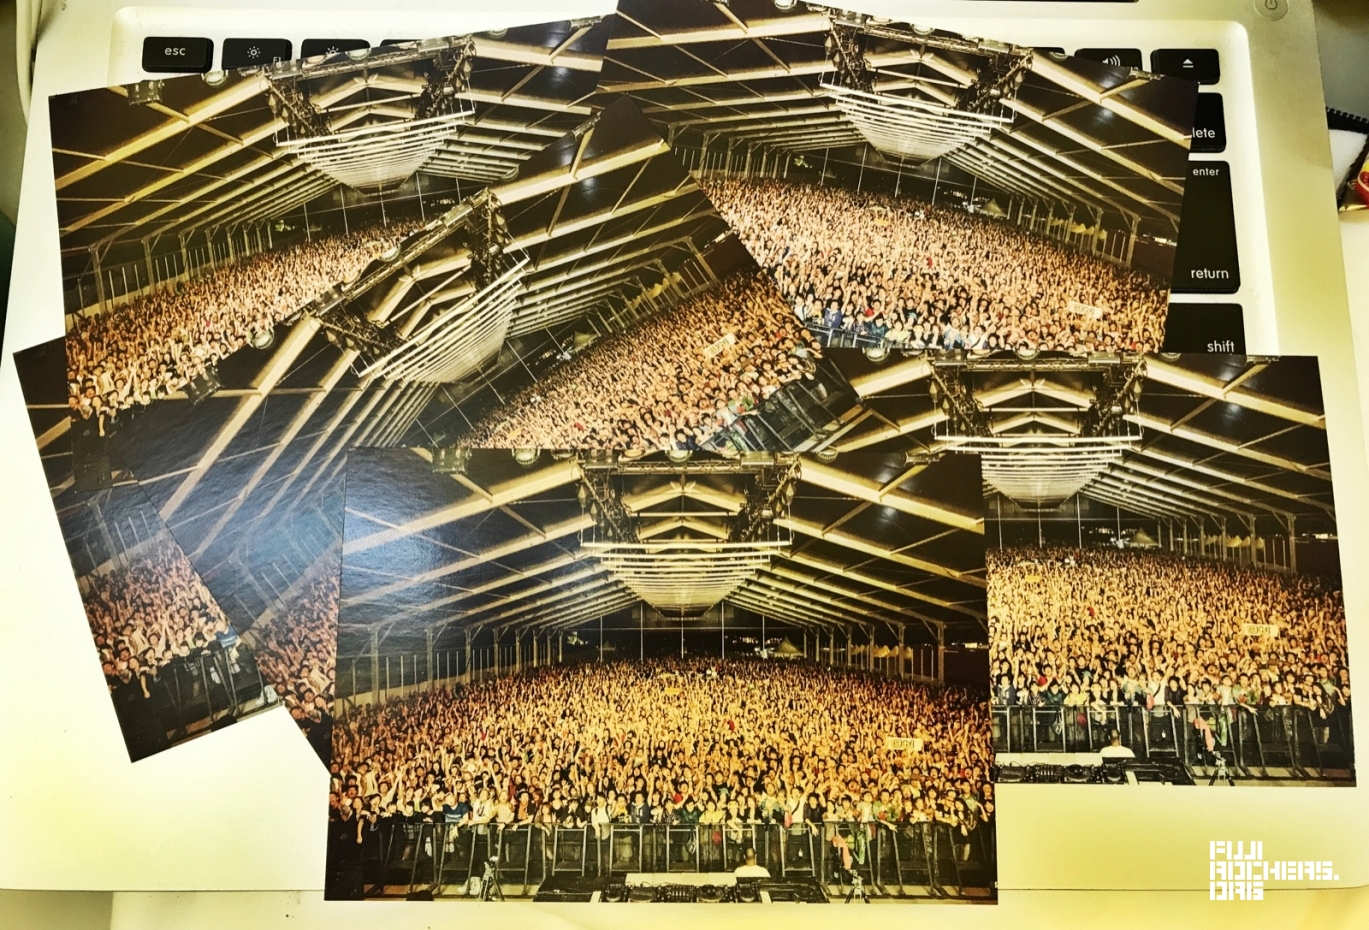 Fuji Rock 2017 Postcards Now Available